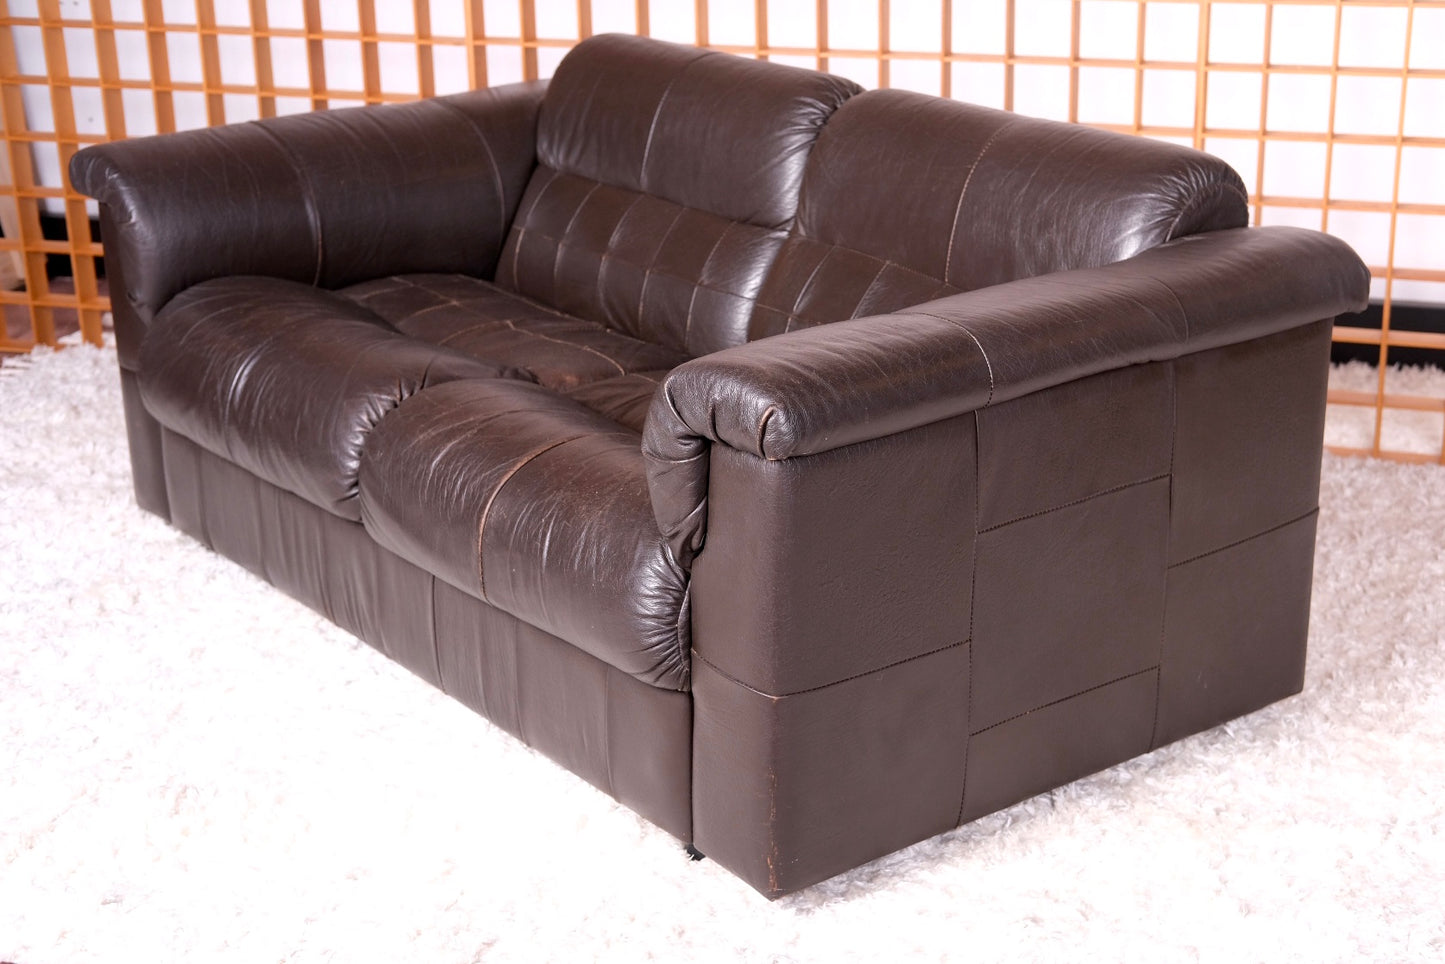 Percival Lafer Patchwork Leather Loveseat